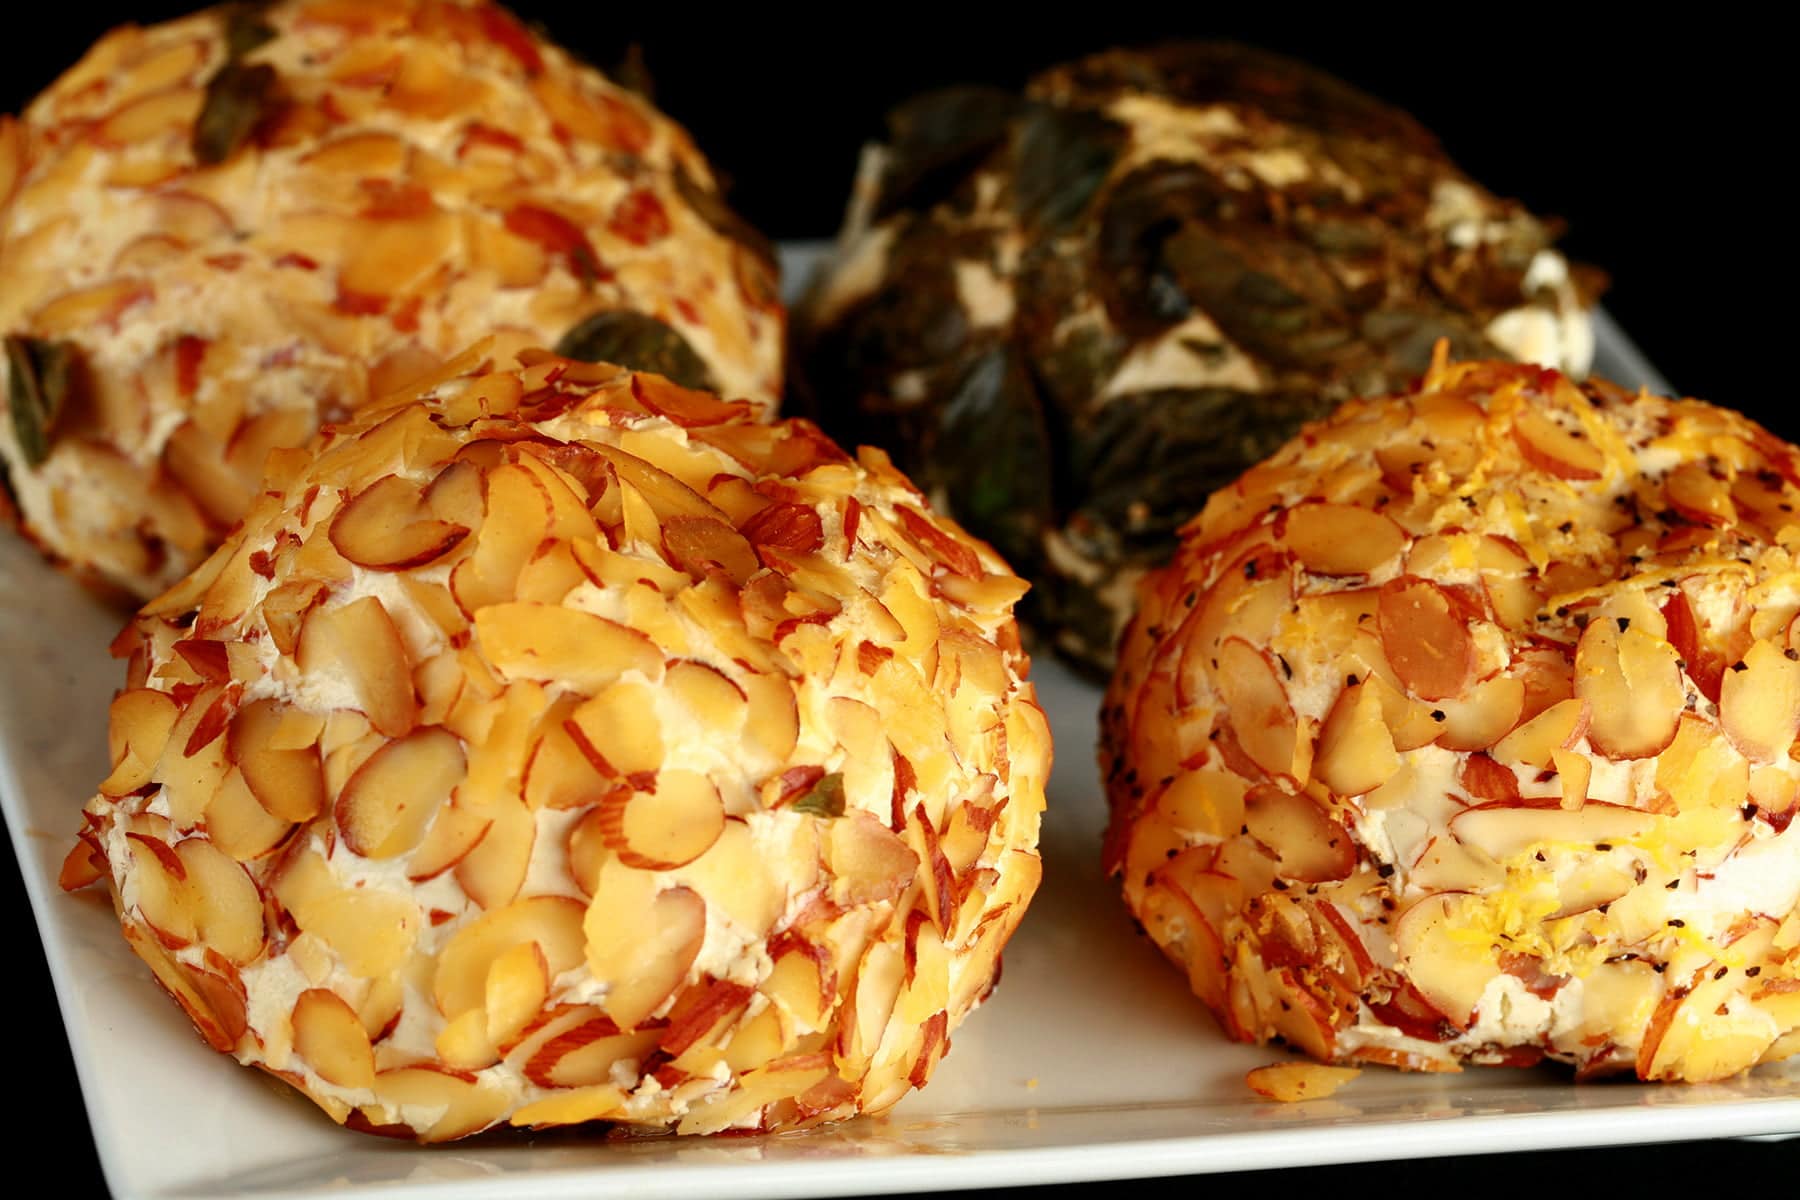 4 smoked cheese balls - with various coatings - are arranged on a plate.